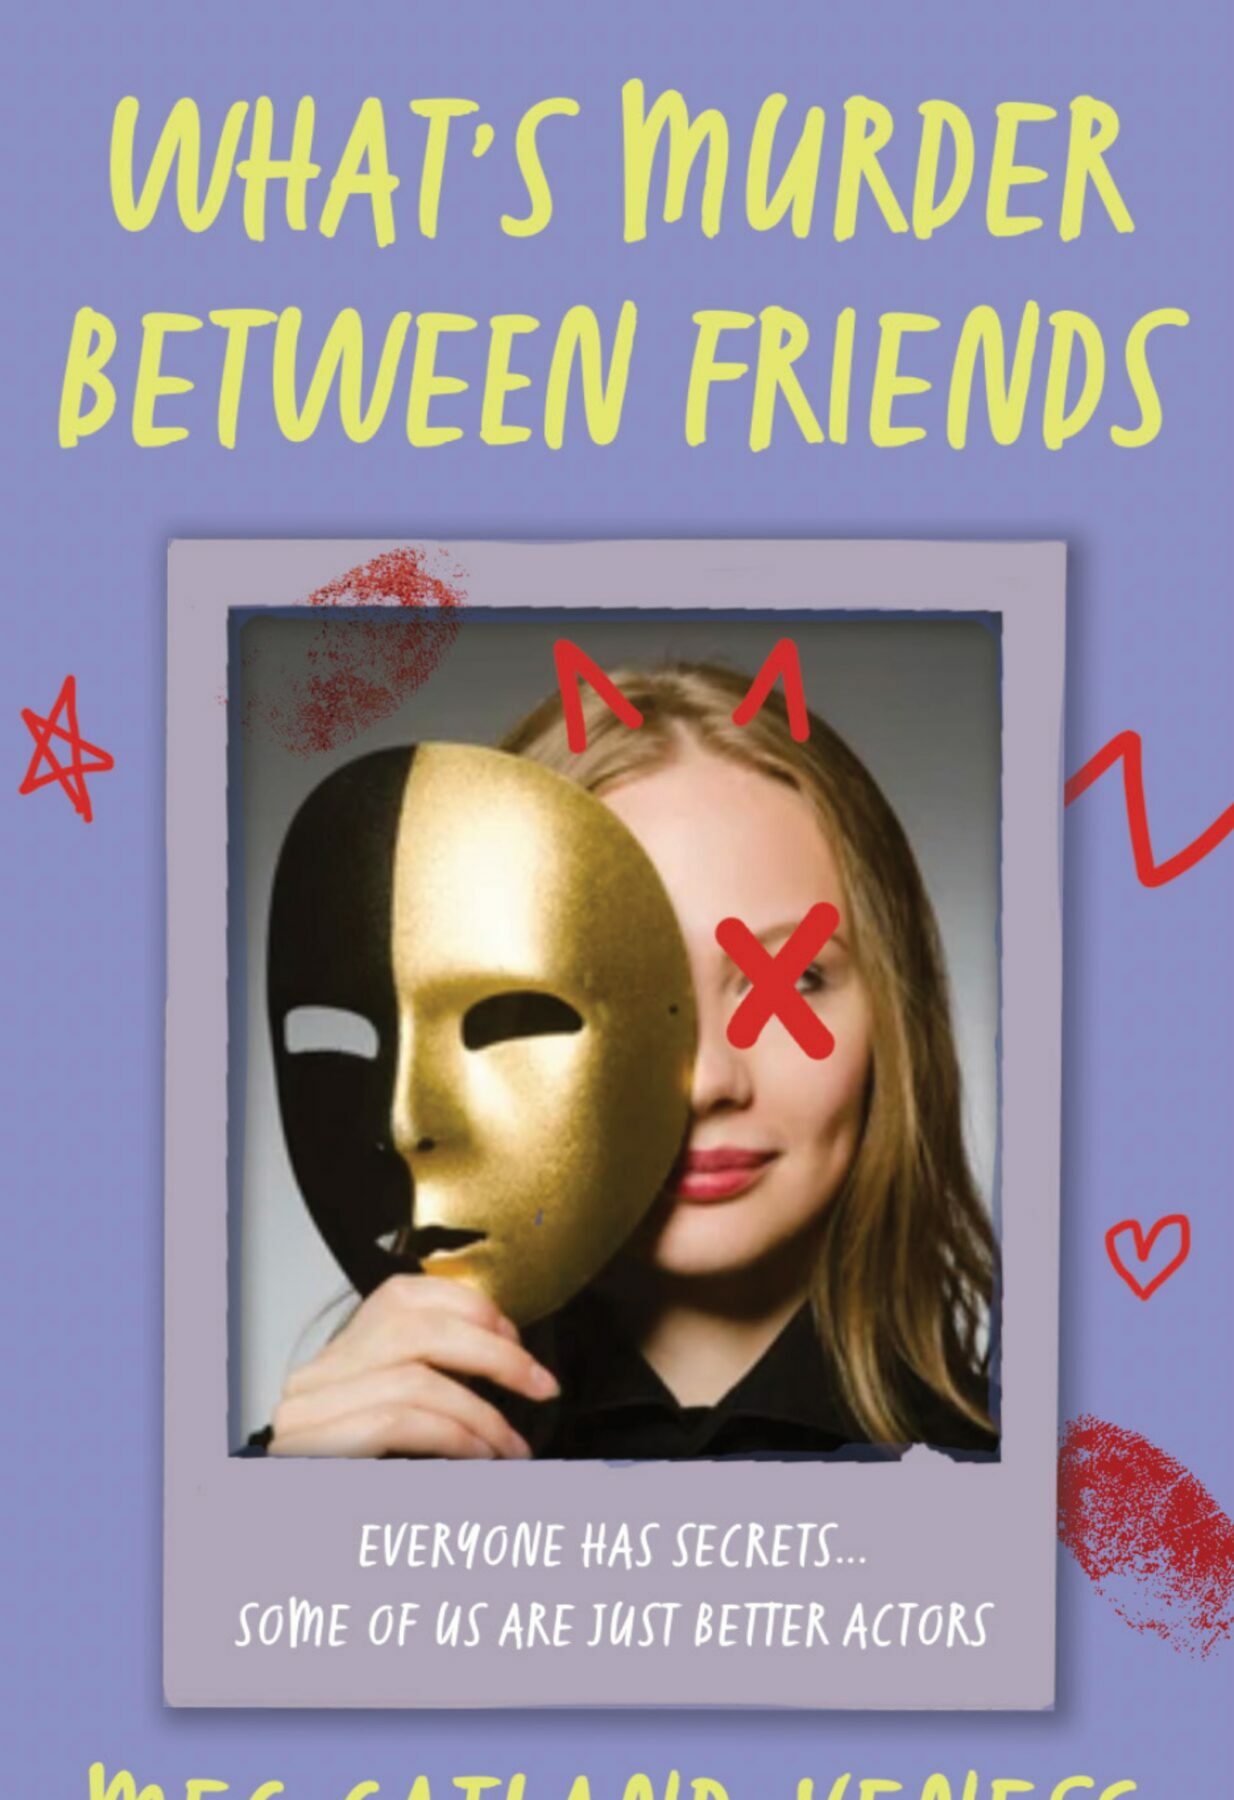 A purple book cover wit a potograph in the centre of a young woman holding a black and gold theatre mask just in front of her face. Red devil ears, a cross over one eye, and scribbles of hearts, stars and lines are spread across the page. The title is in yellow handwriting-style font above the image and the author's name is at the bottom of the page